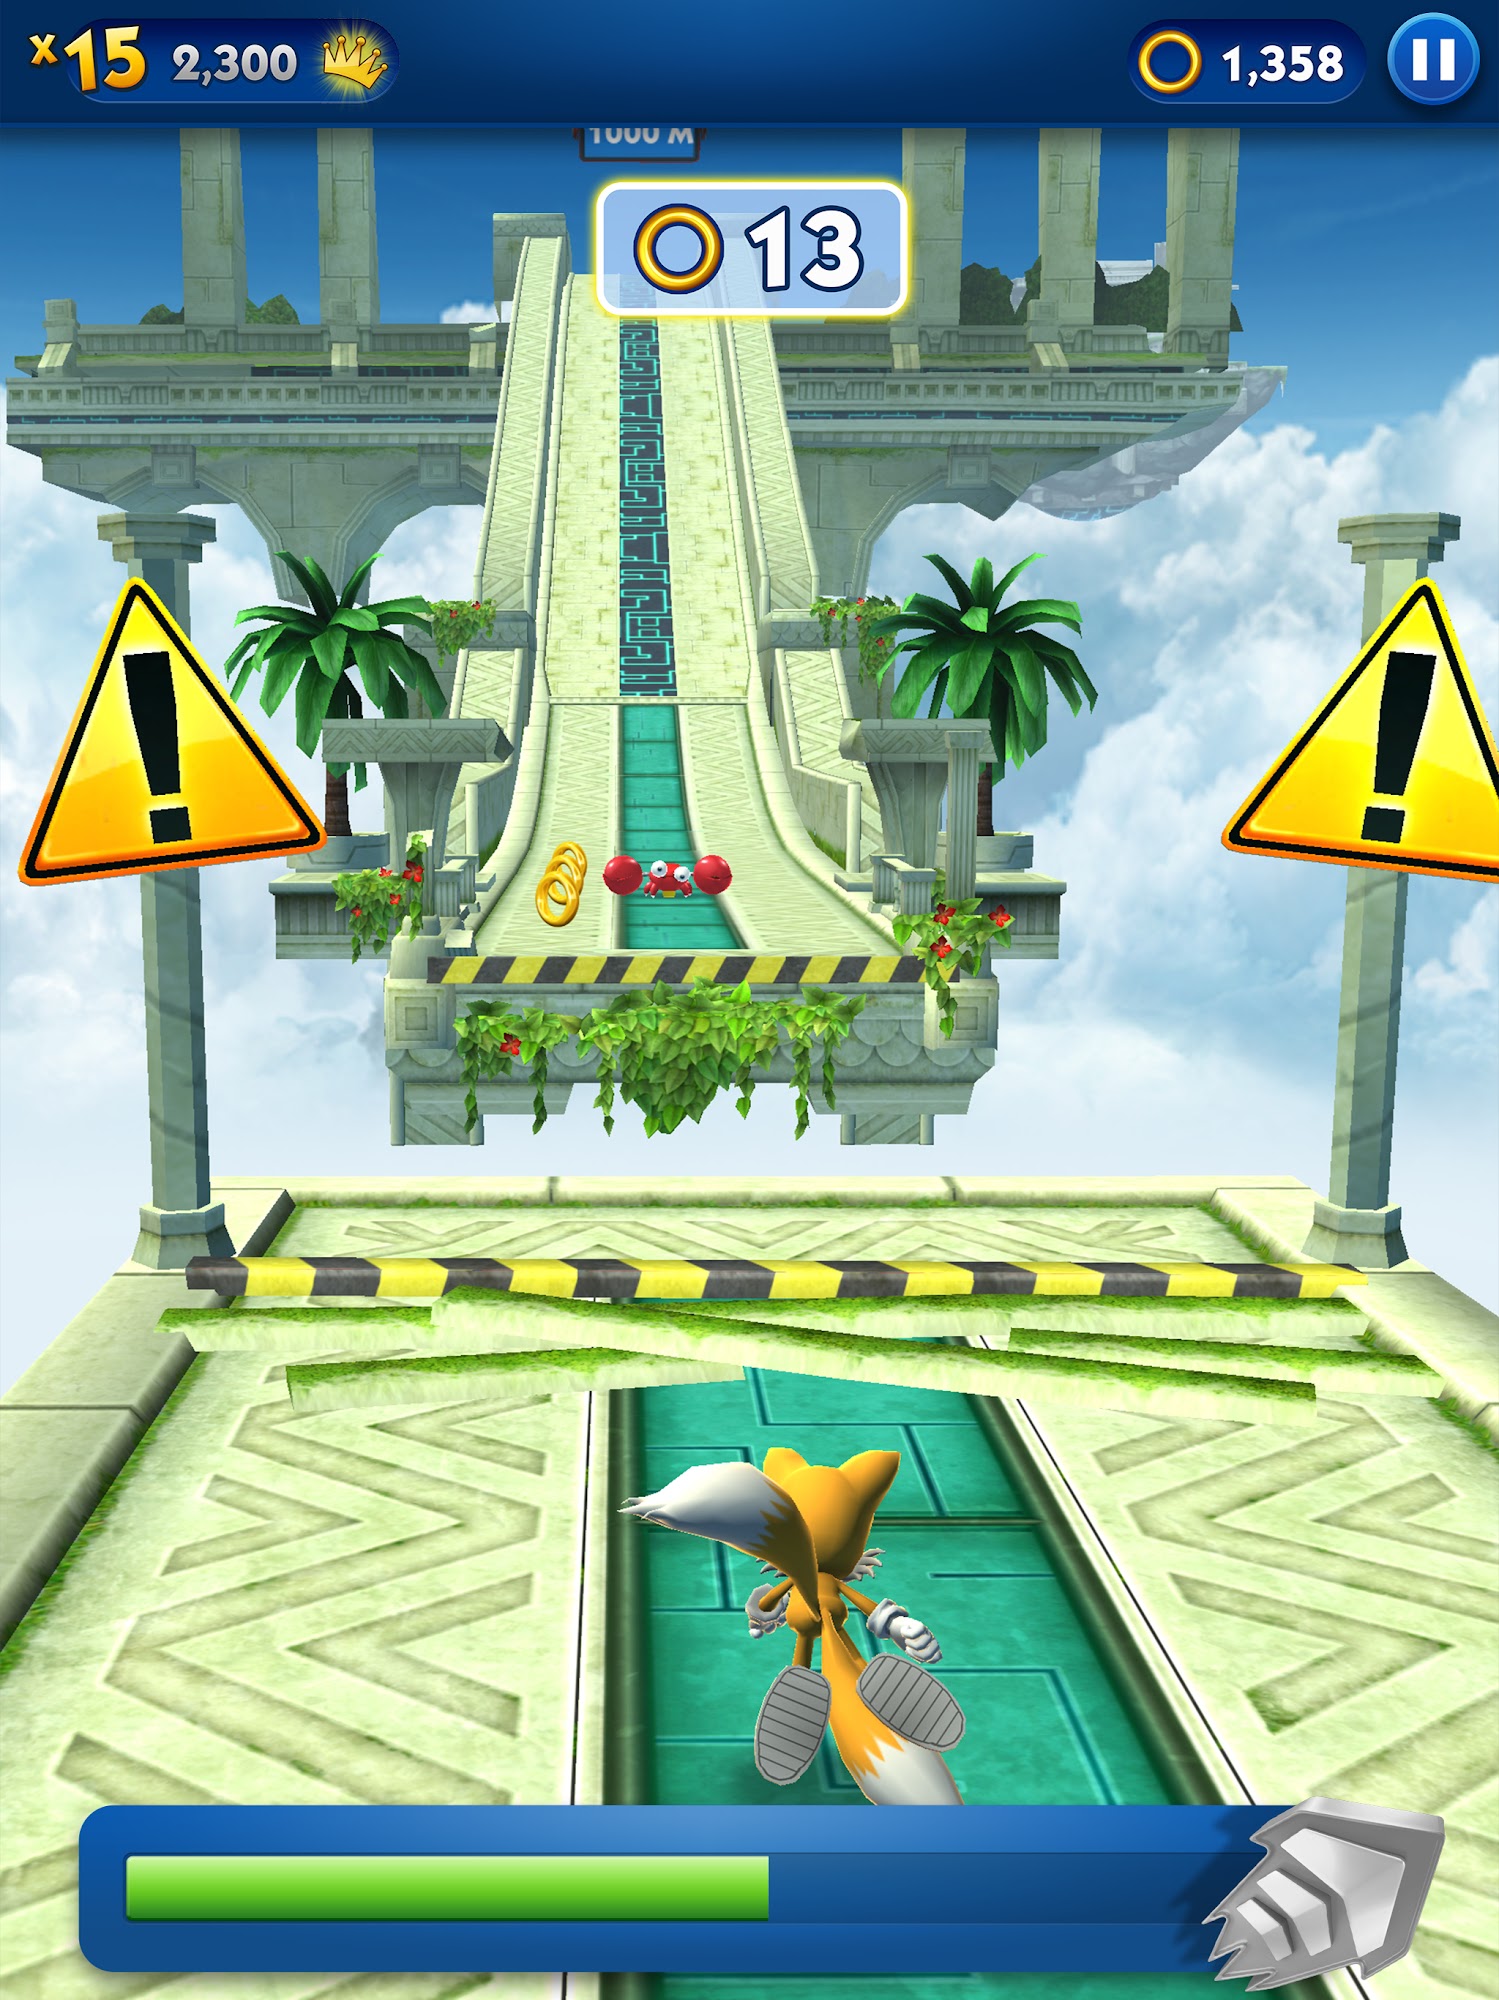 Sonic Prime Dash - Android game screenshots.